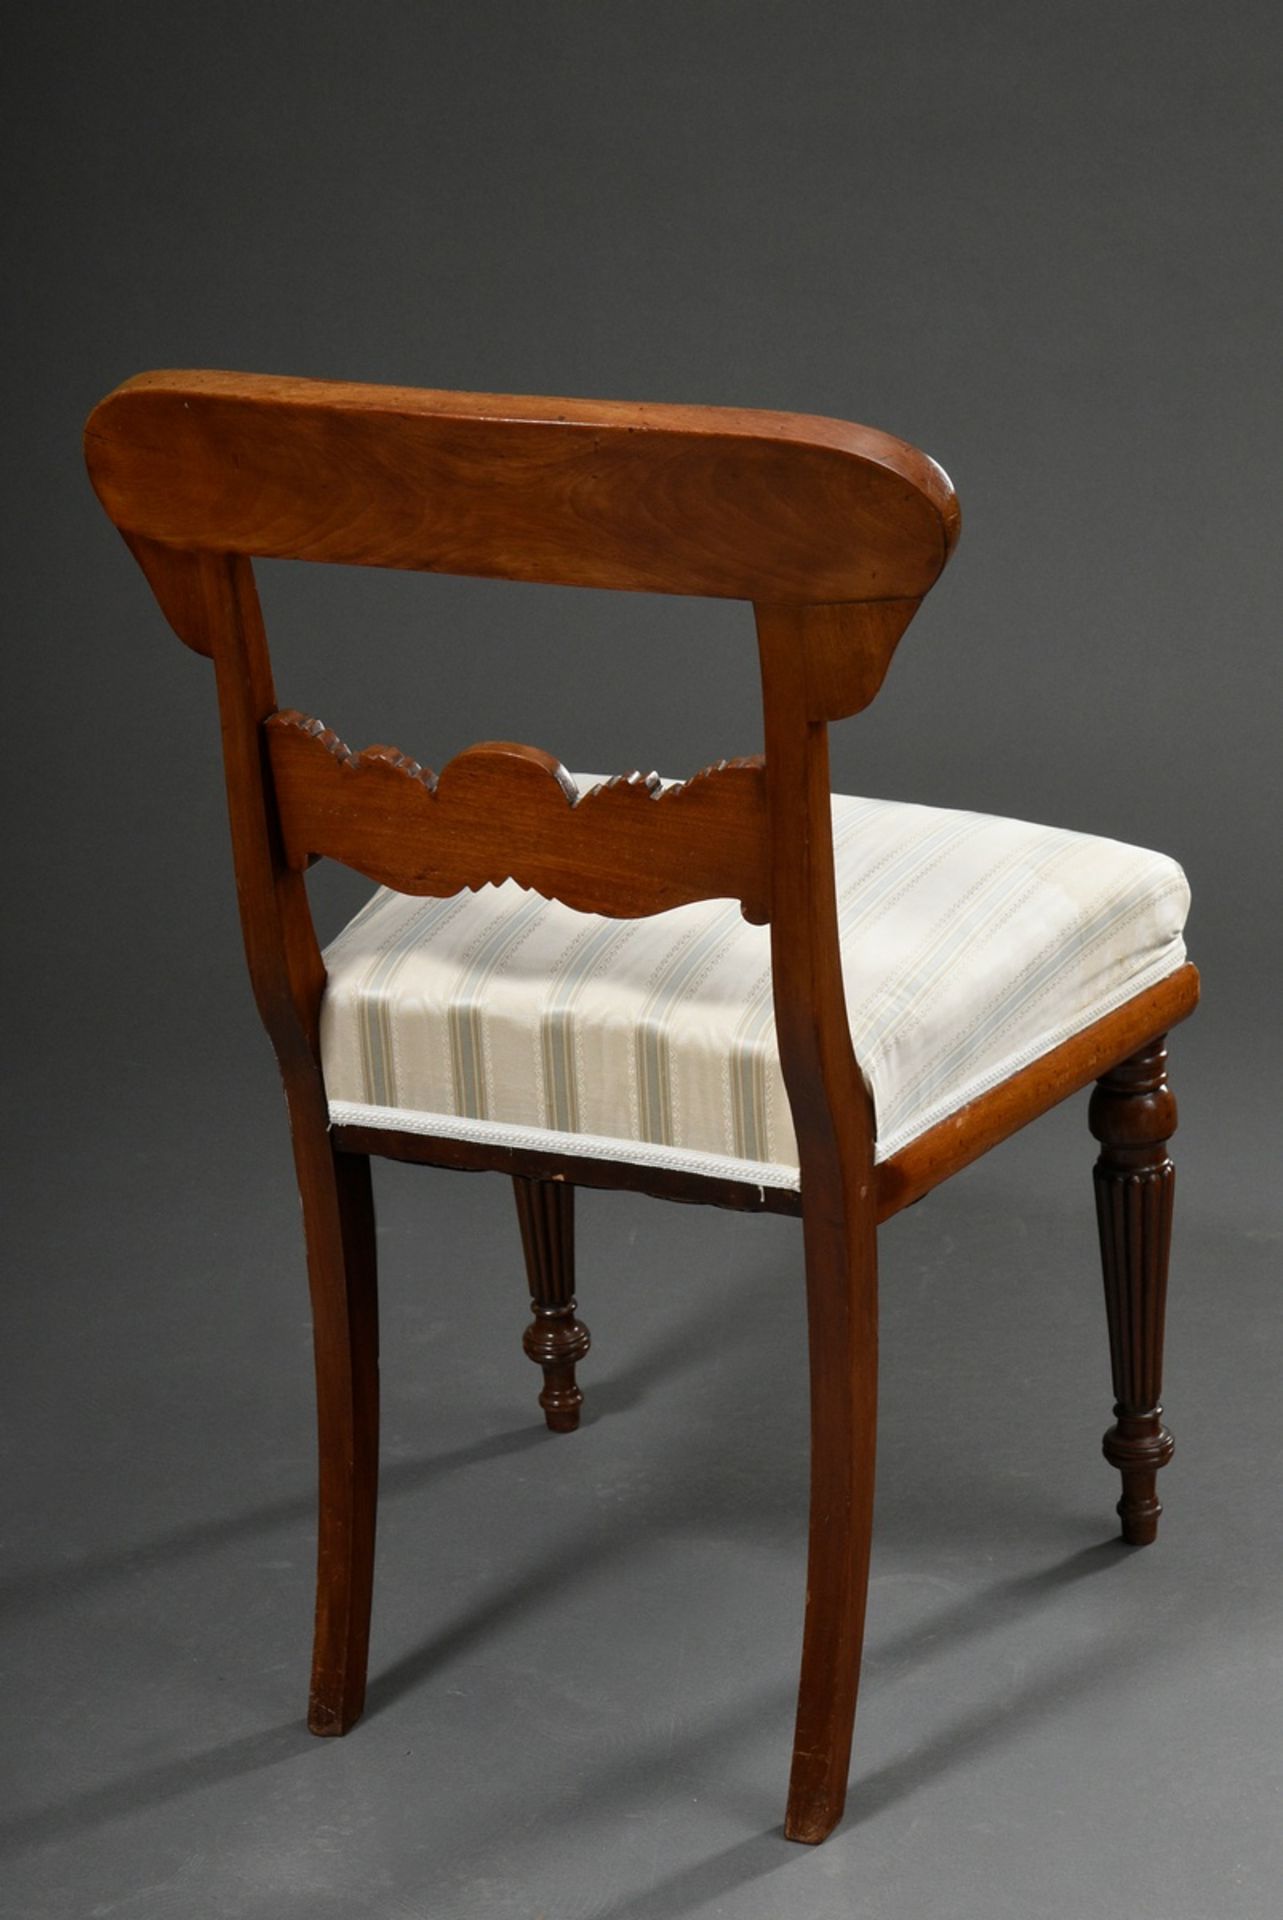 6 Biedermeier chairs with richly carved frame: back board with acanthus leaves and shell motif, sco - Image 5 of 5